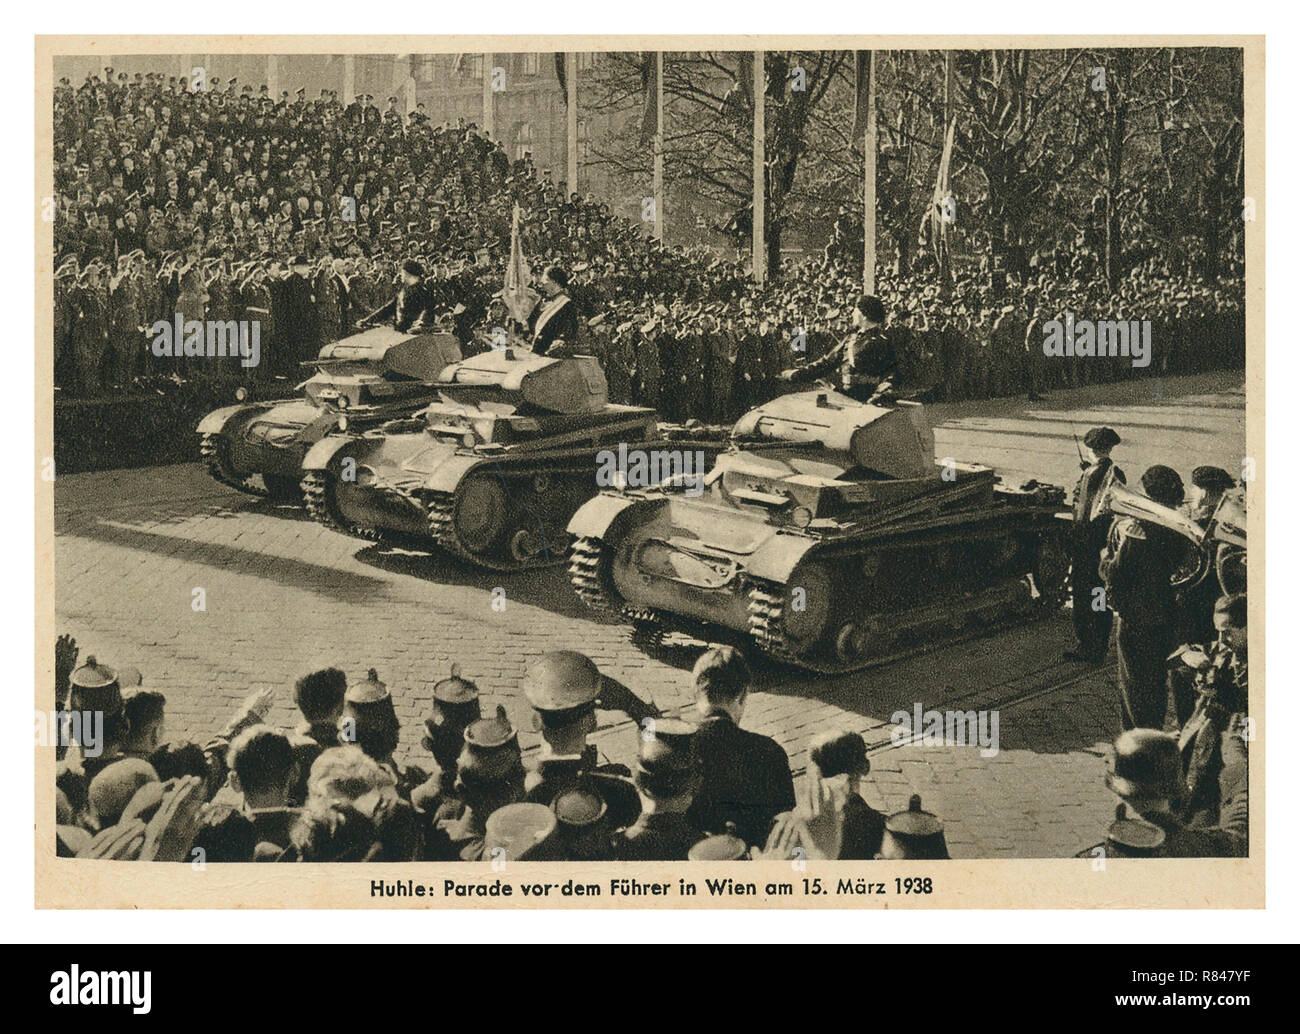 Anschluss Nazi Germany Parade with Adolf Hitler WIEN VIENNA 1938 news archive image Führer Adolf Hitler, takes Military Nazi occupying forces parade, in Vienna Austria. Anschluss Nazi Germany occupation of Austria Stock Photo